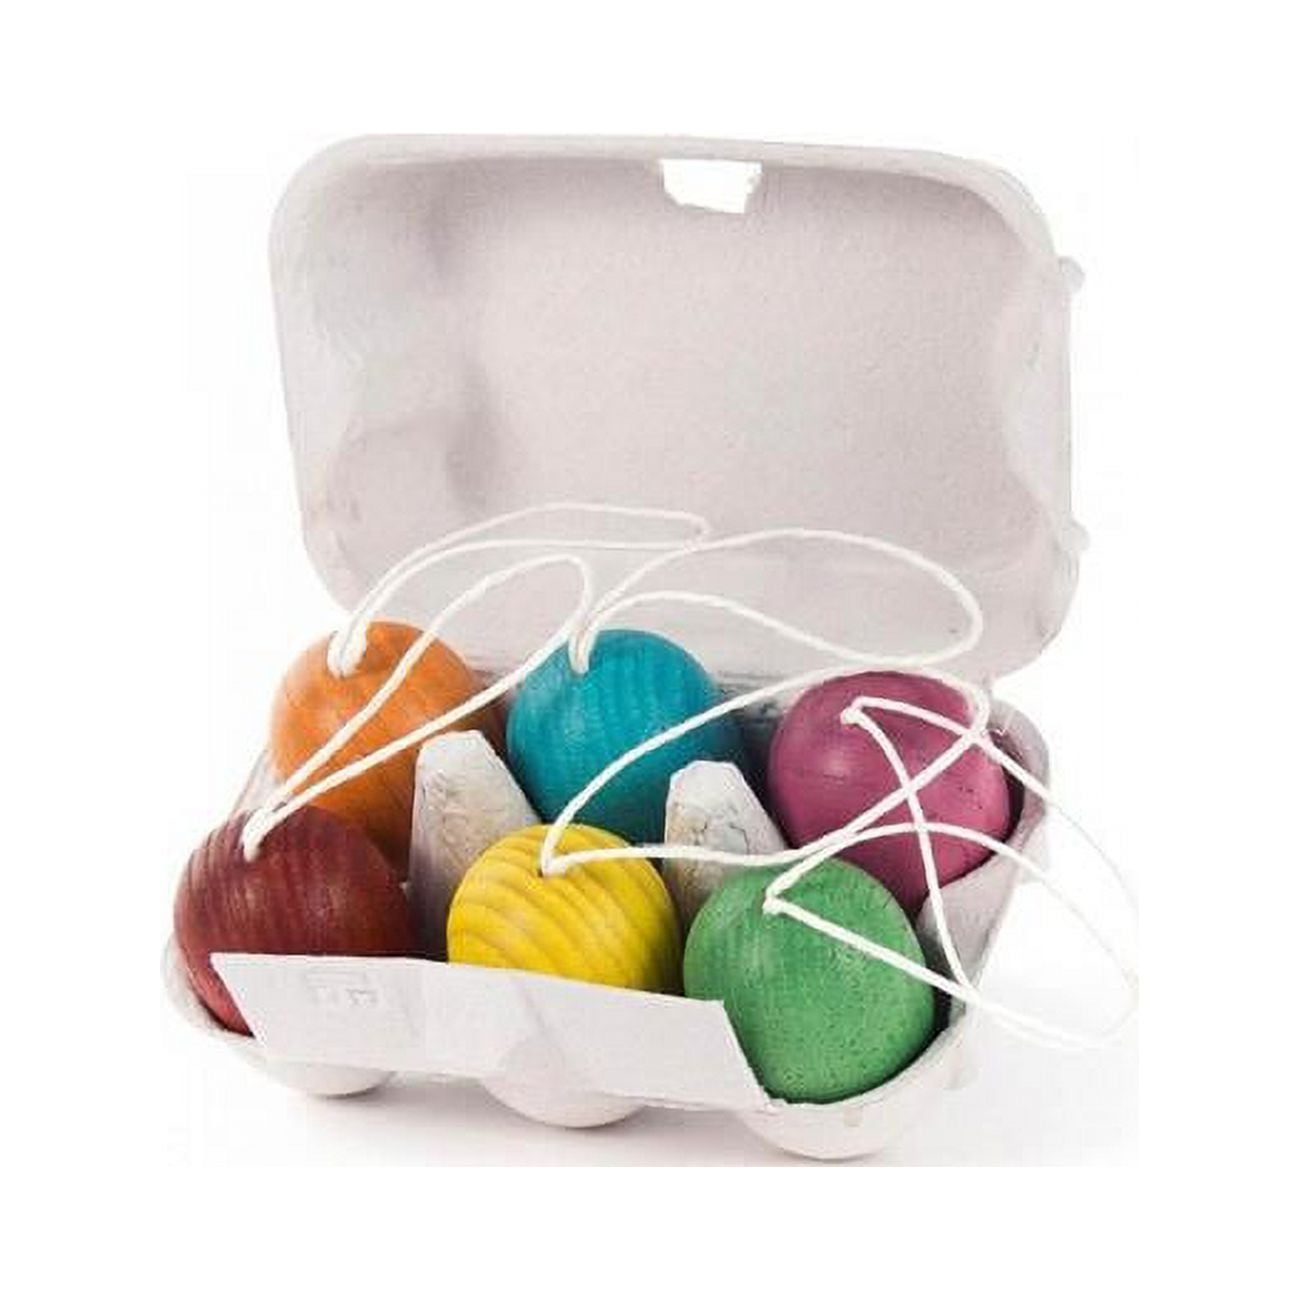 Picture of Alexander Taron 224-007-1 Dregeno Easter Ornaments - Assorted Easter Eggs - Set of 6